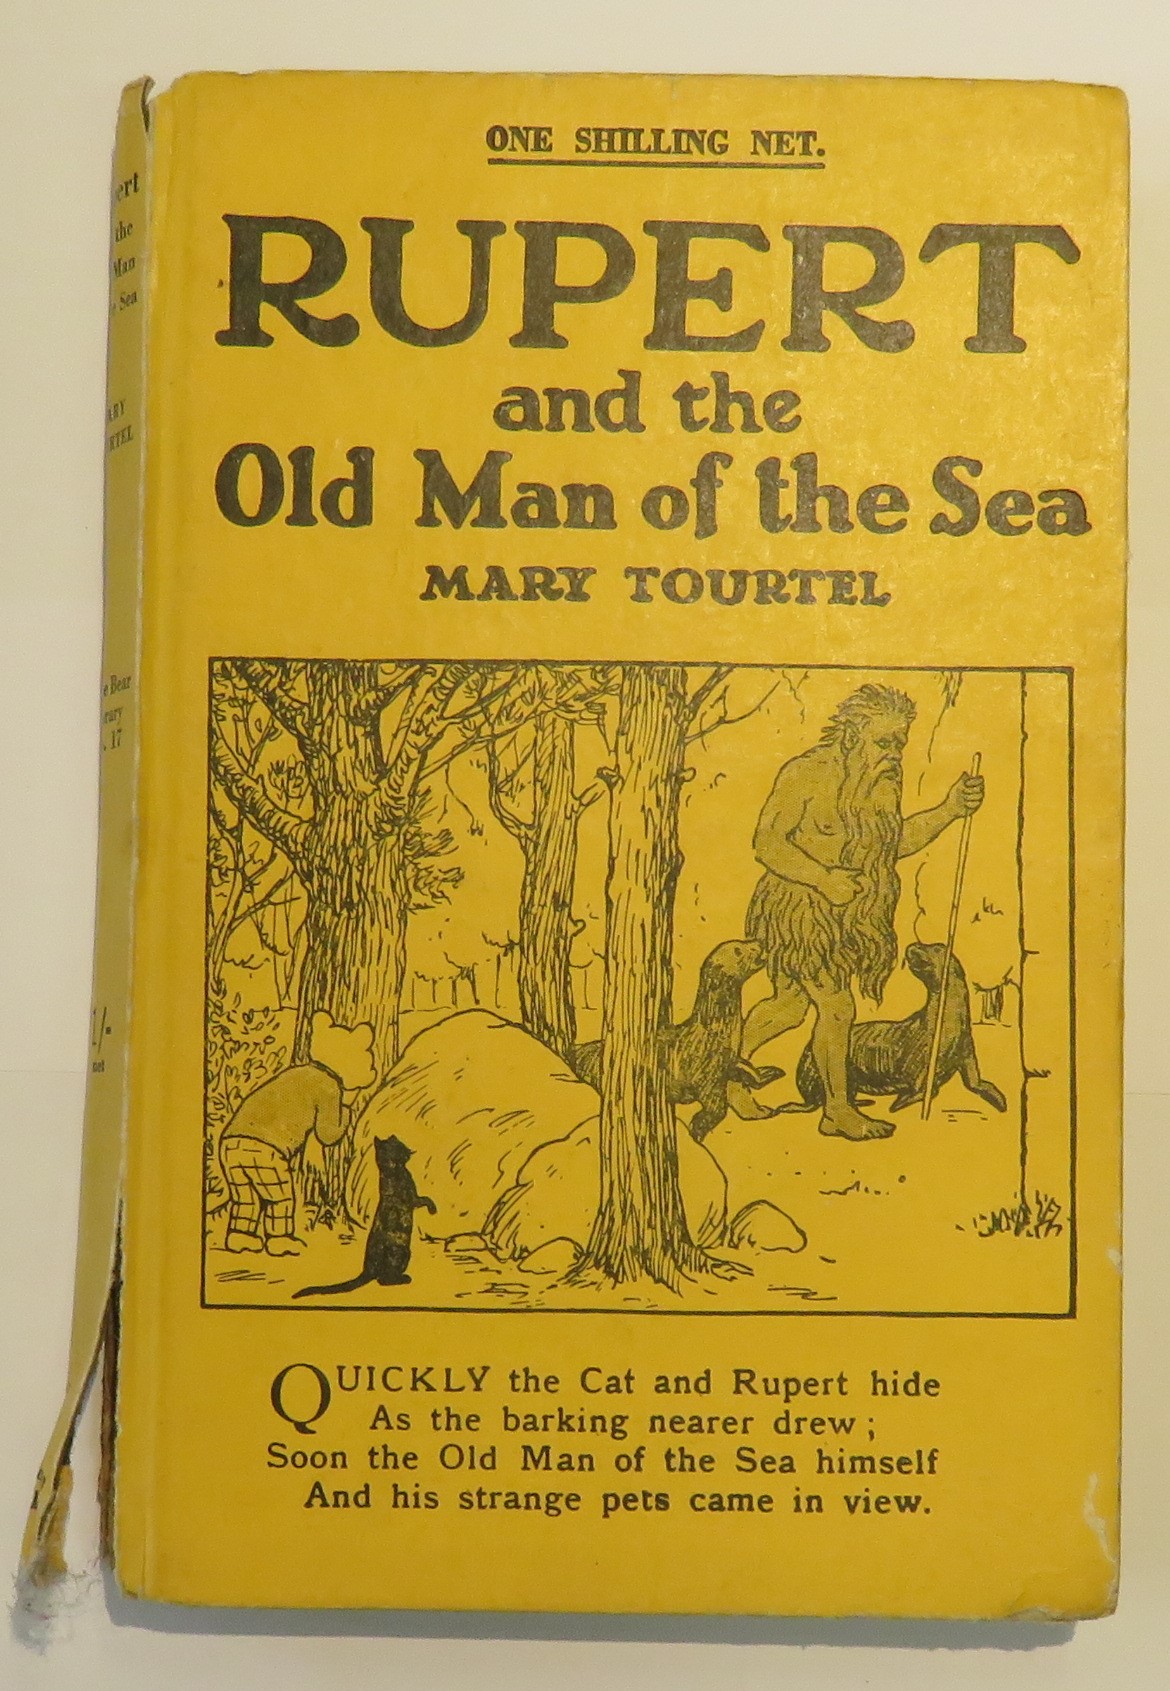 Rupert and the Old Man of the Sea